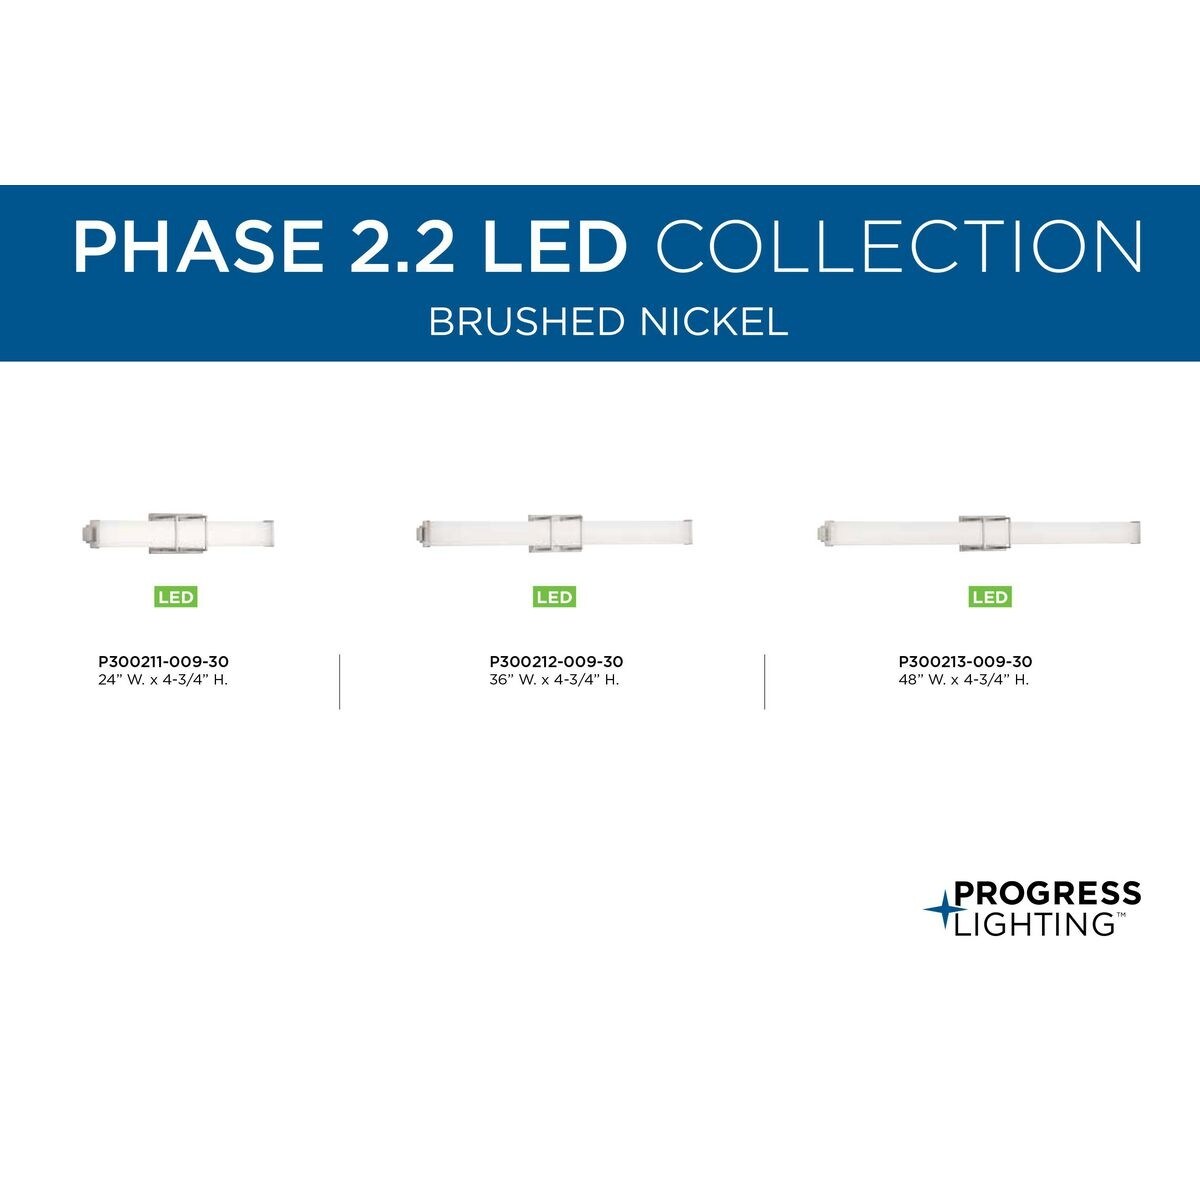 Phase 2.2 LED Collection 48